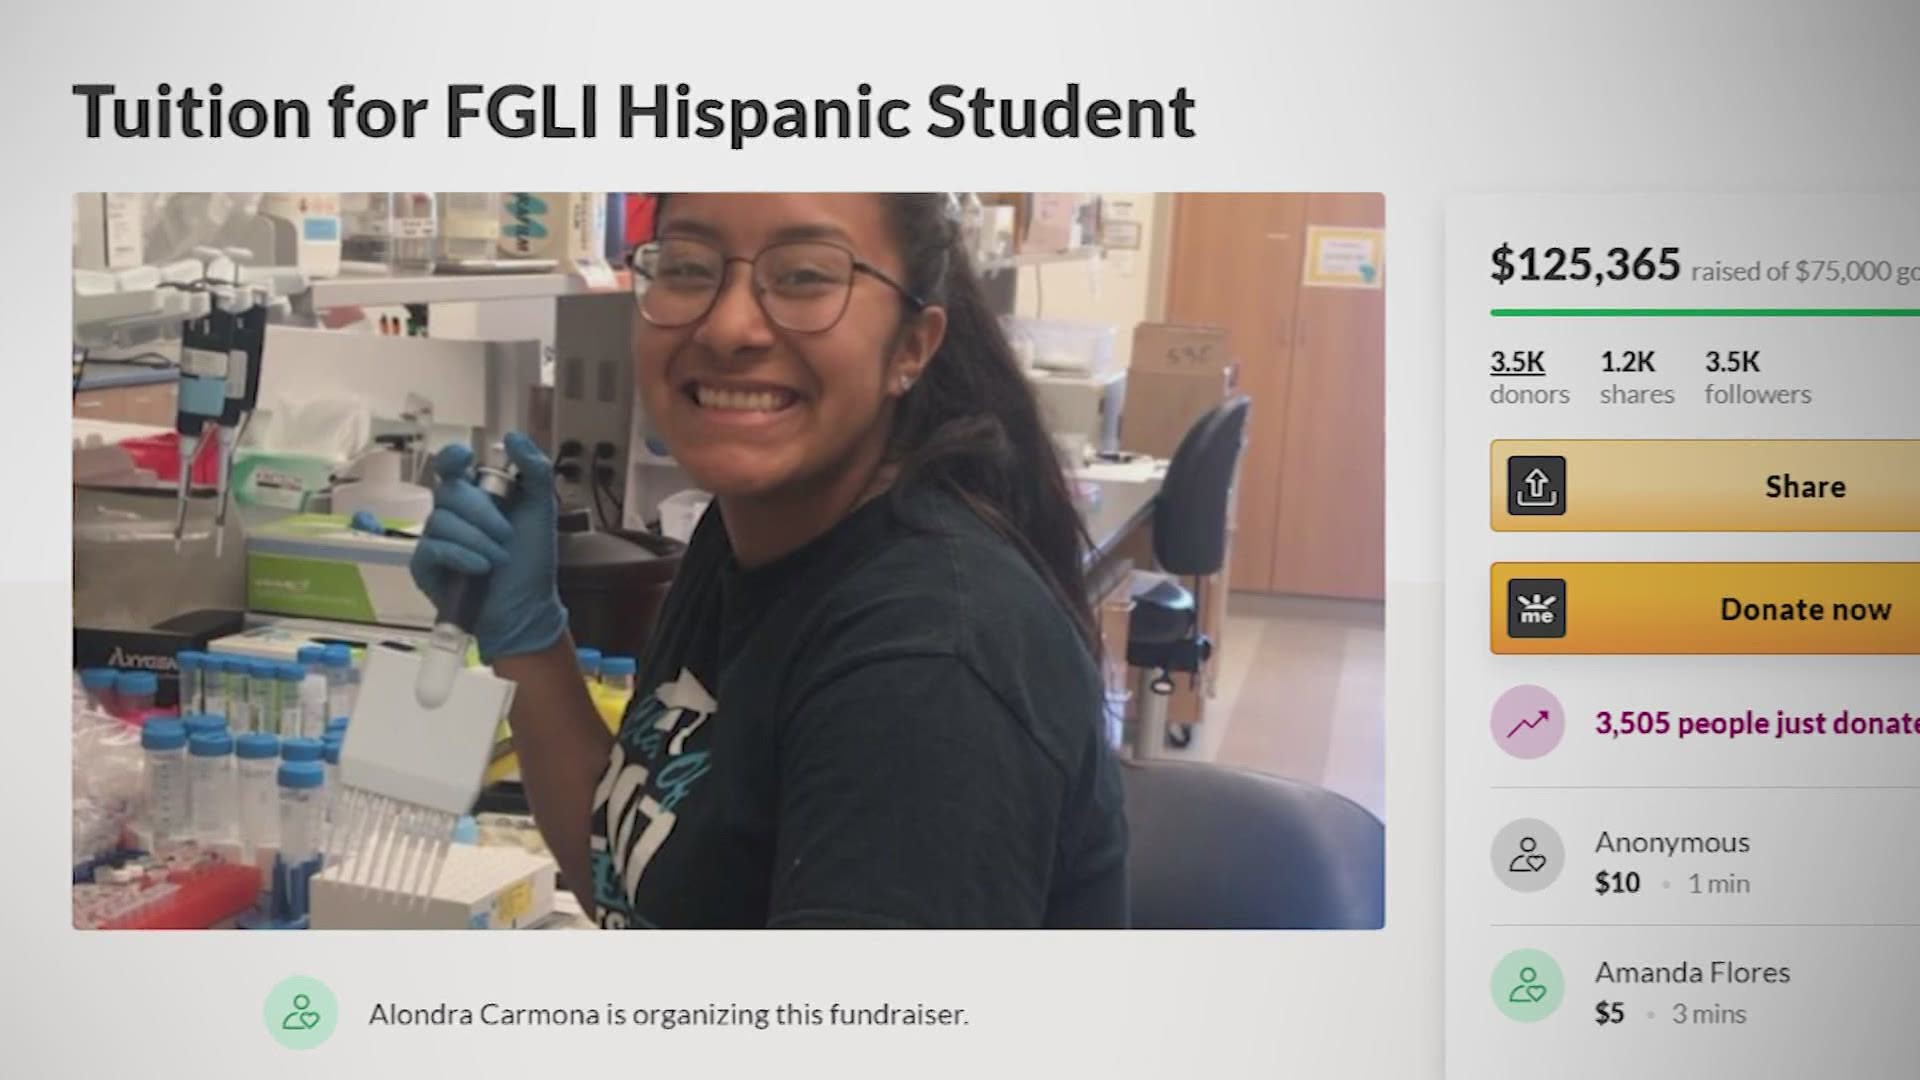 Thanks to thousands of donors, Alondra Carmona will be able to attend her dream school: Barnard College in New York City.